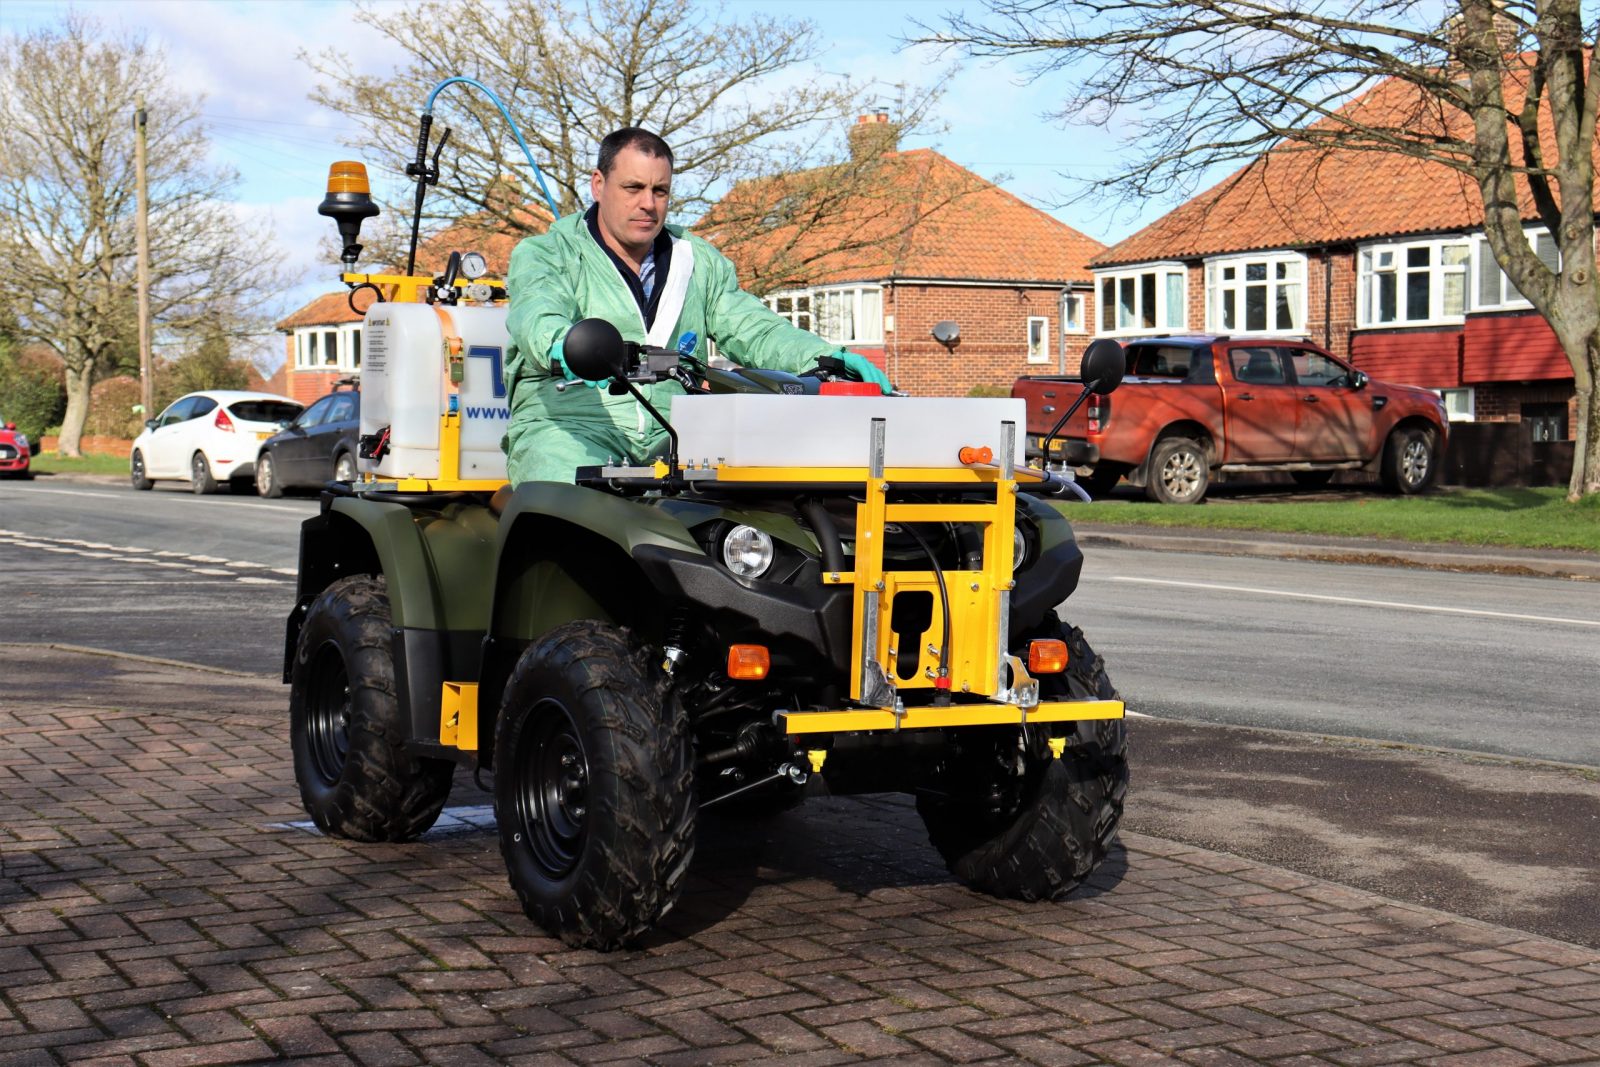 VALE Engineering’s PKL450 ATV quad bike mounted weed sprayer is one of the only spraying systems suitable for highway kerb-edge spraying, hard surfaces and mowing margins.